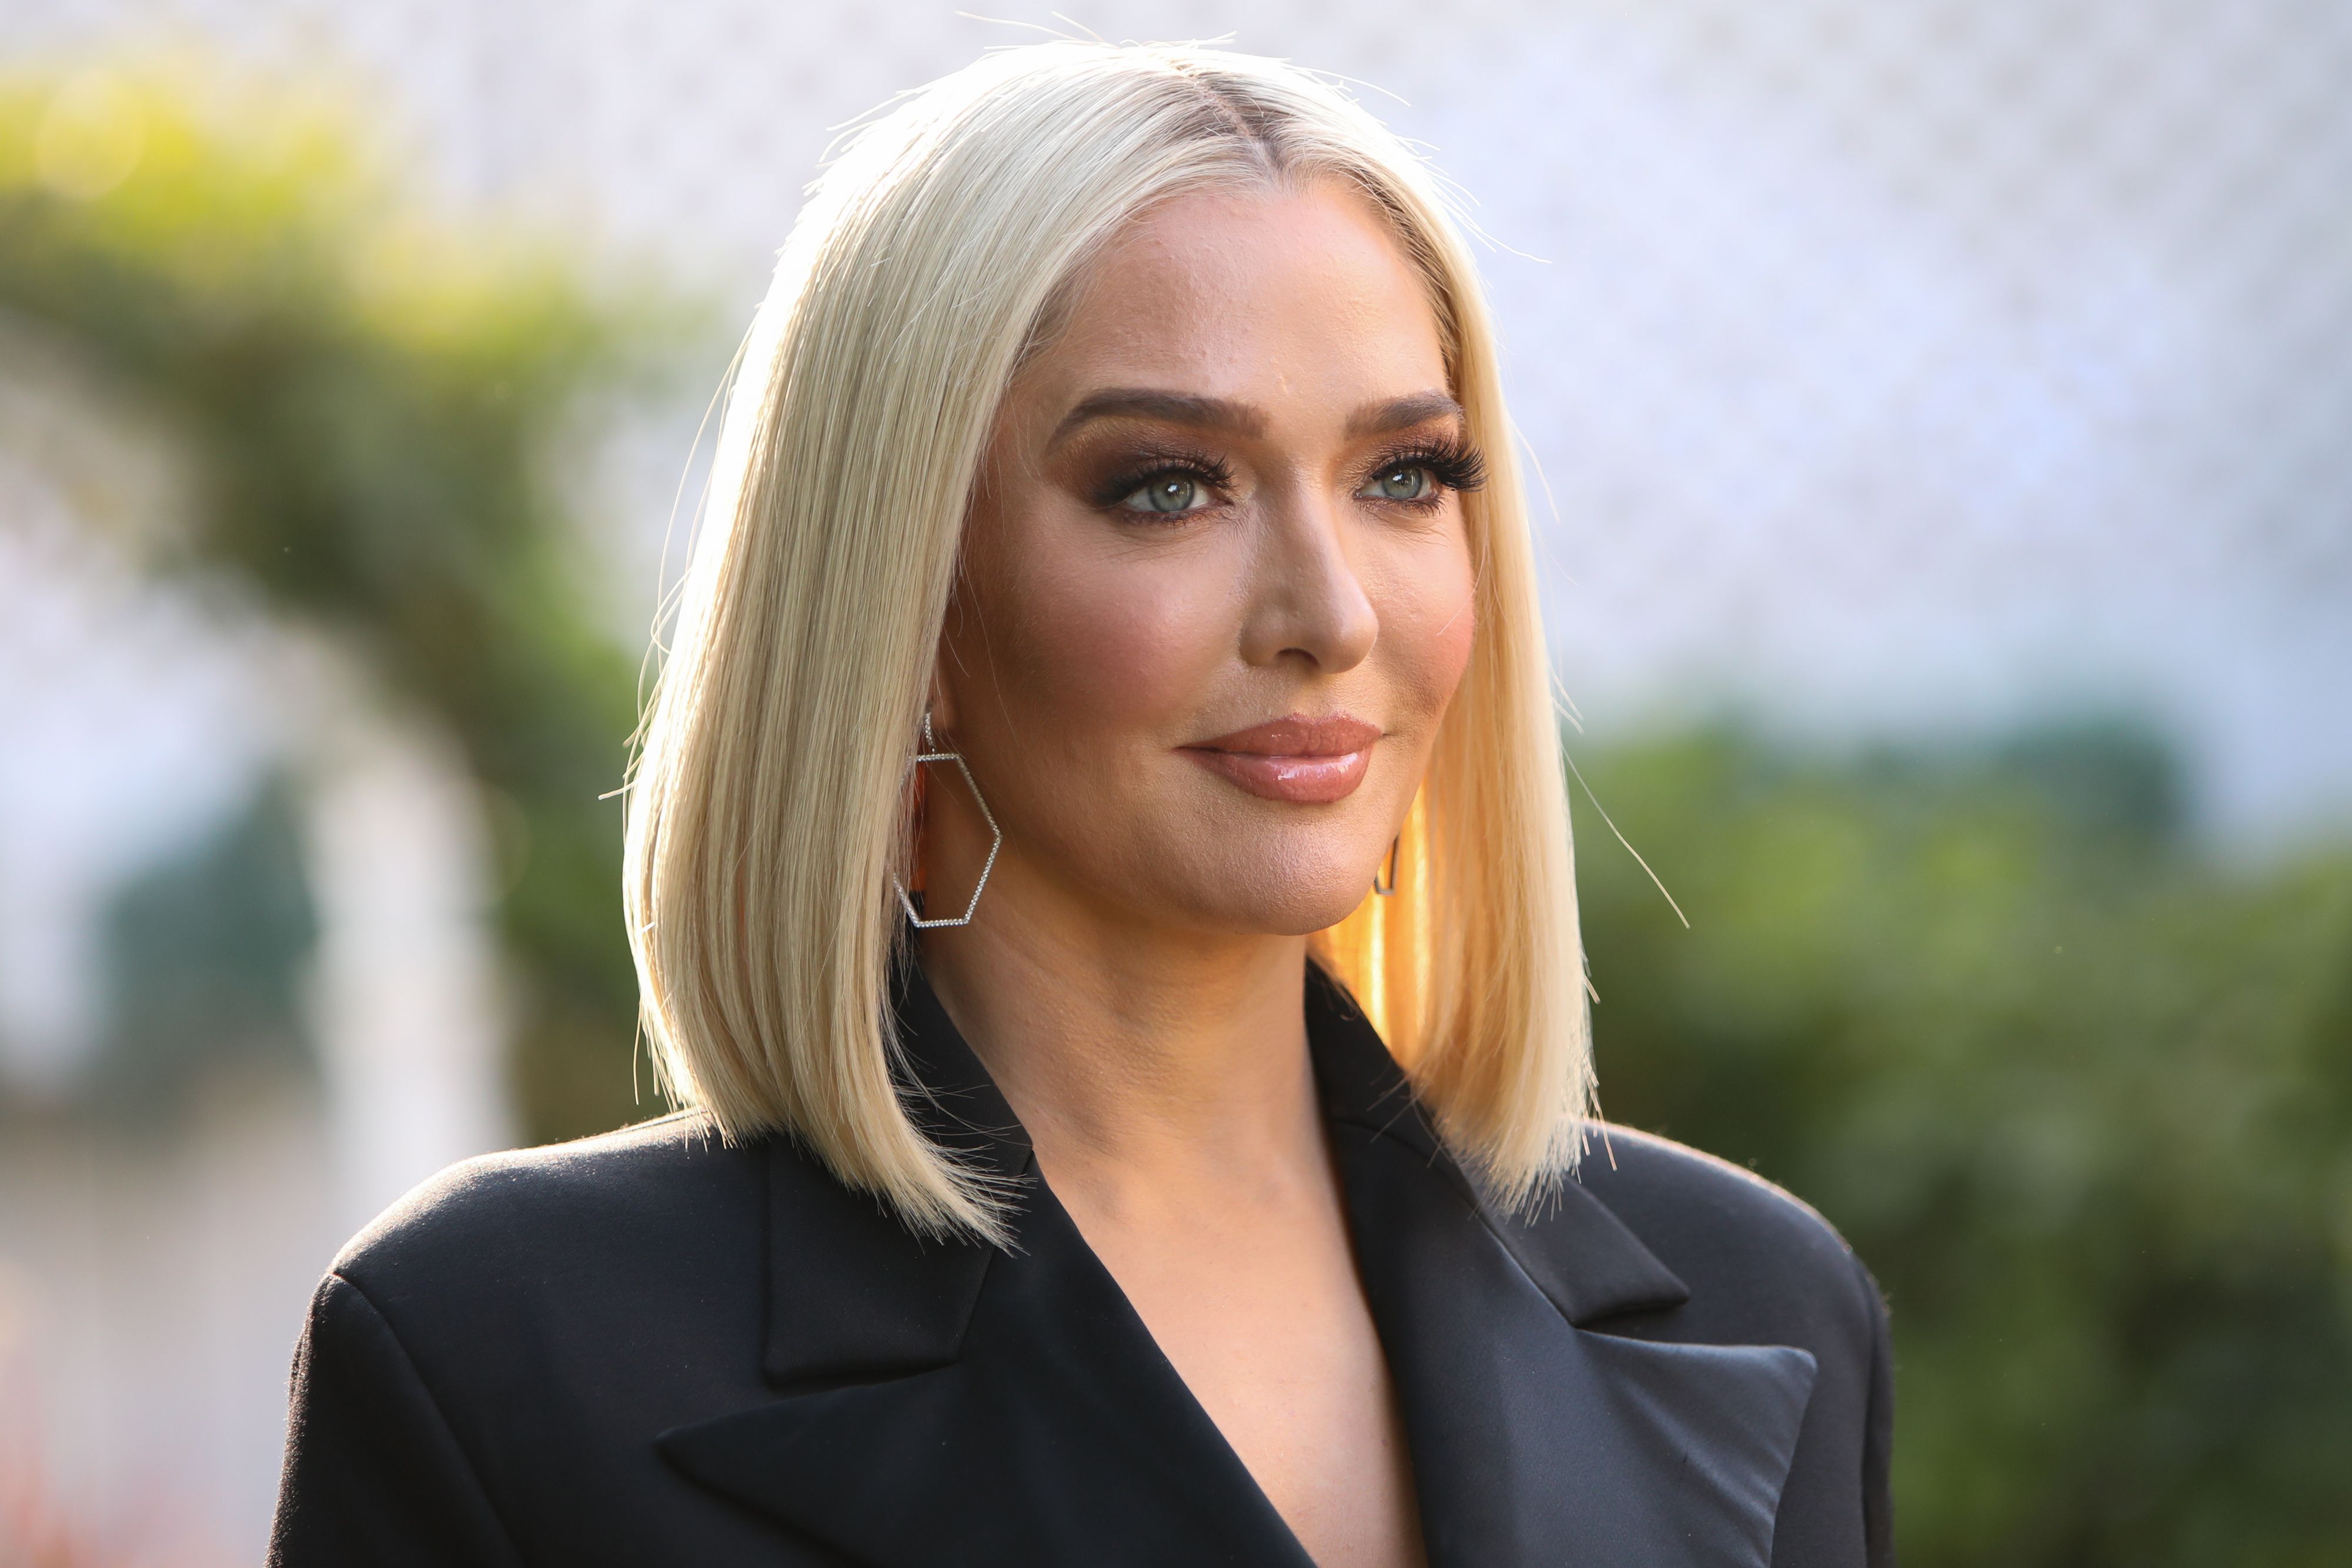 Erika Jayne visits Hallmark Channel's "Home & Family" at Universal Studios Hollywood on November 11, 2019, in Universal City, California | Photo: Paul Archuleta/Getty Images